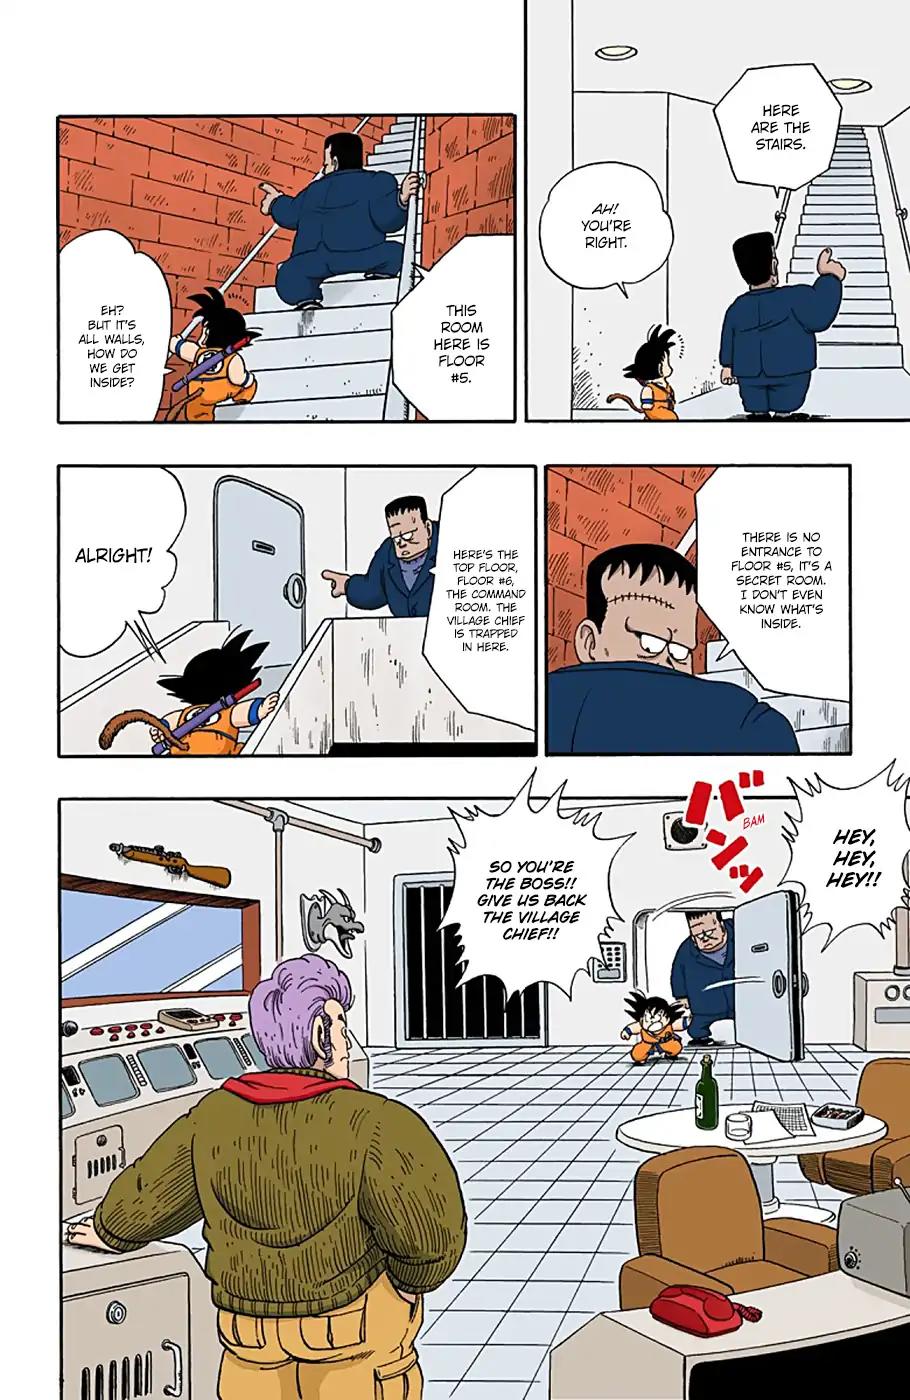 Dragon Ball - Full Color Vol.5 Chapter 63: